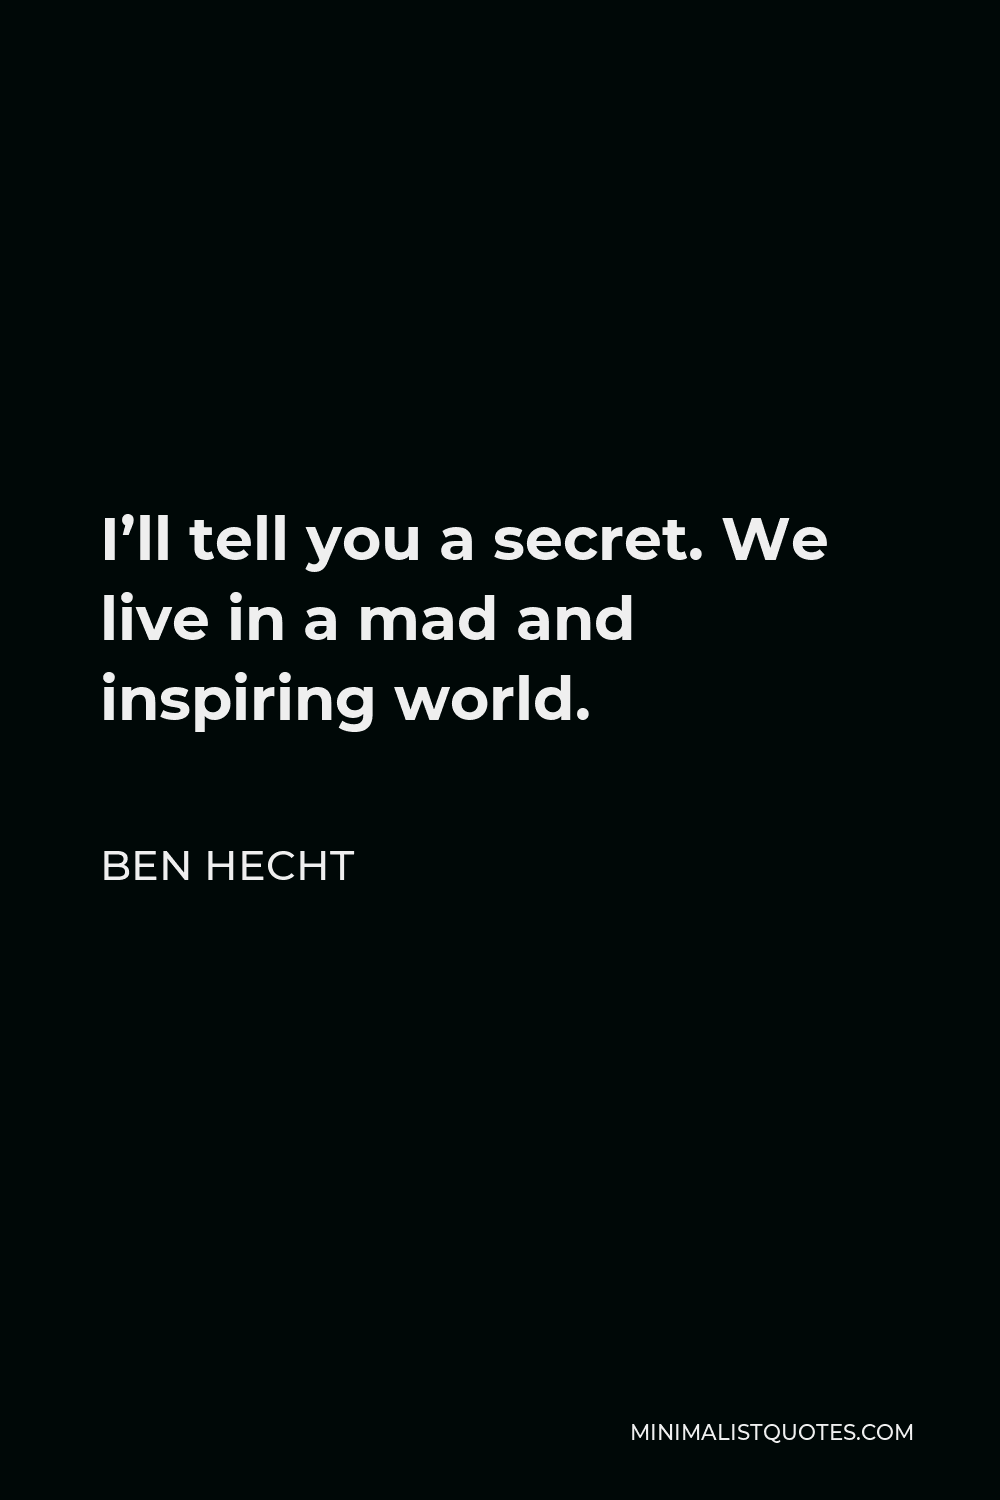 Ben Hecht Quote: I'll tell you a secret. We live in a mad and inspiring ...